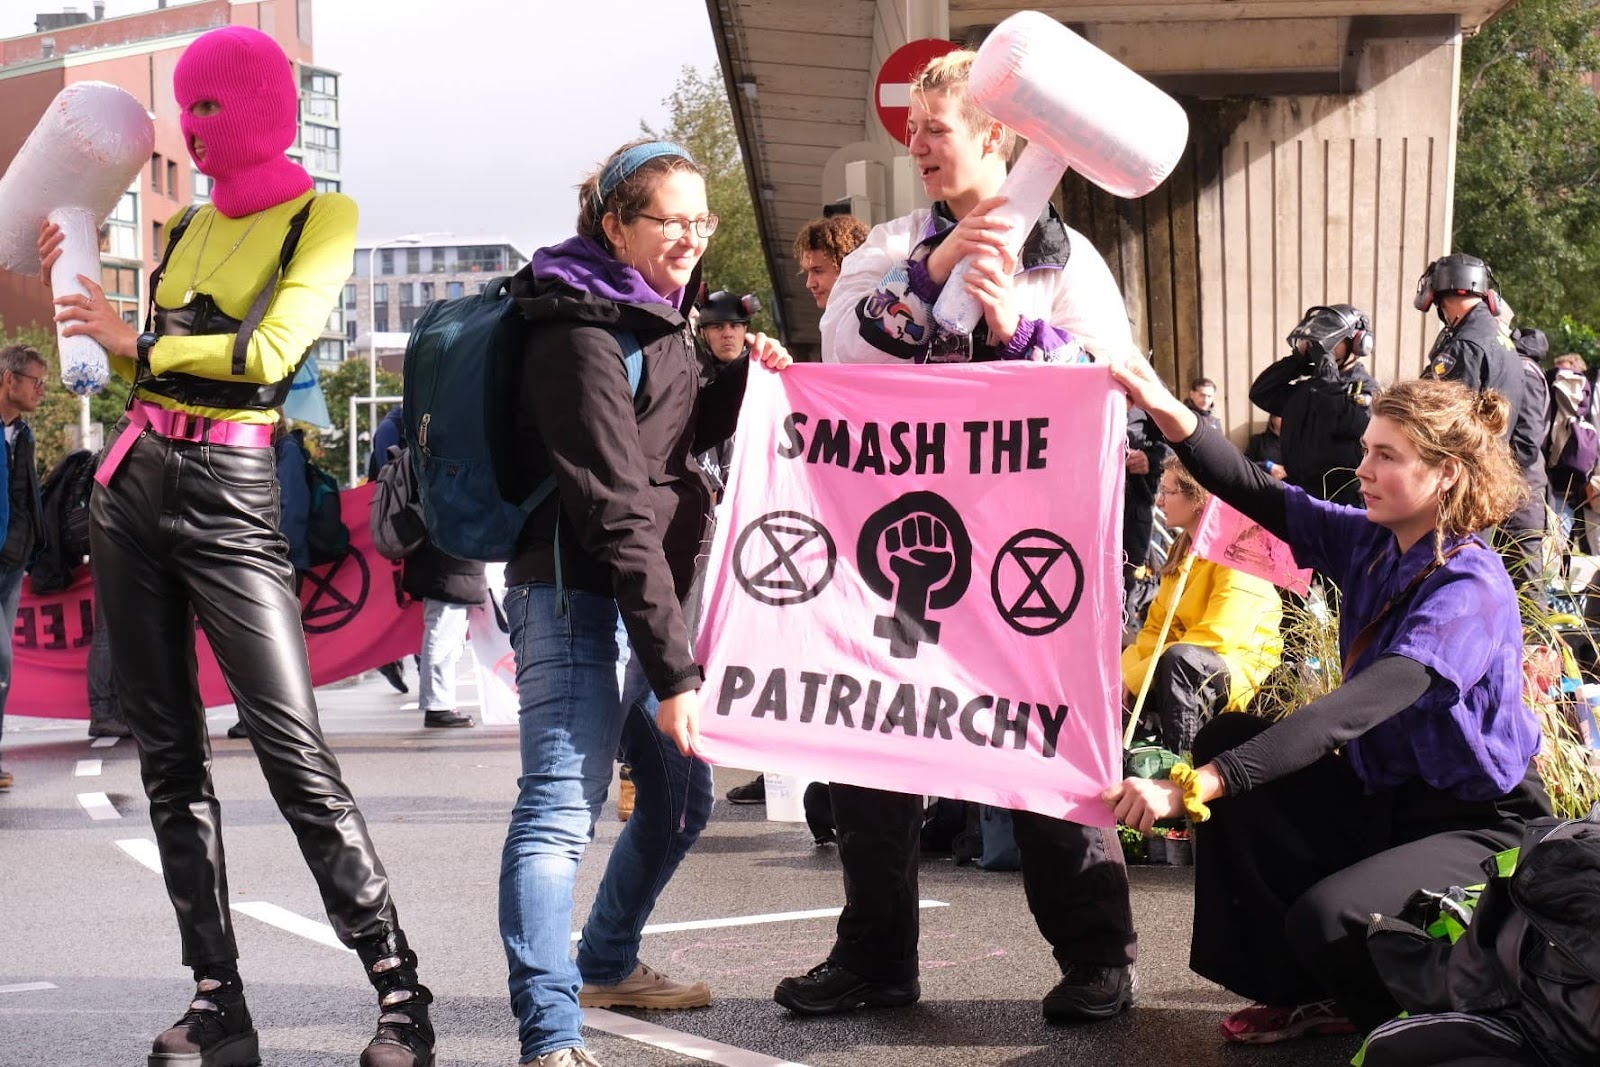 Rebels hold pink hammer shaped cushions and a sign that says smash the patriarchy. Nearby a rebel wears fetish gear and a pink balaclava